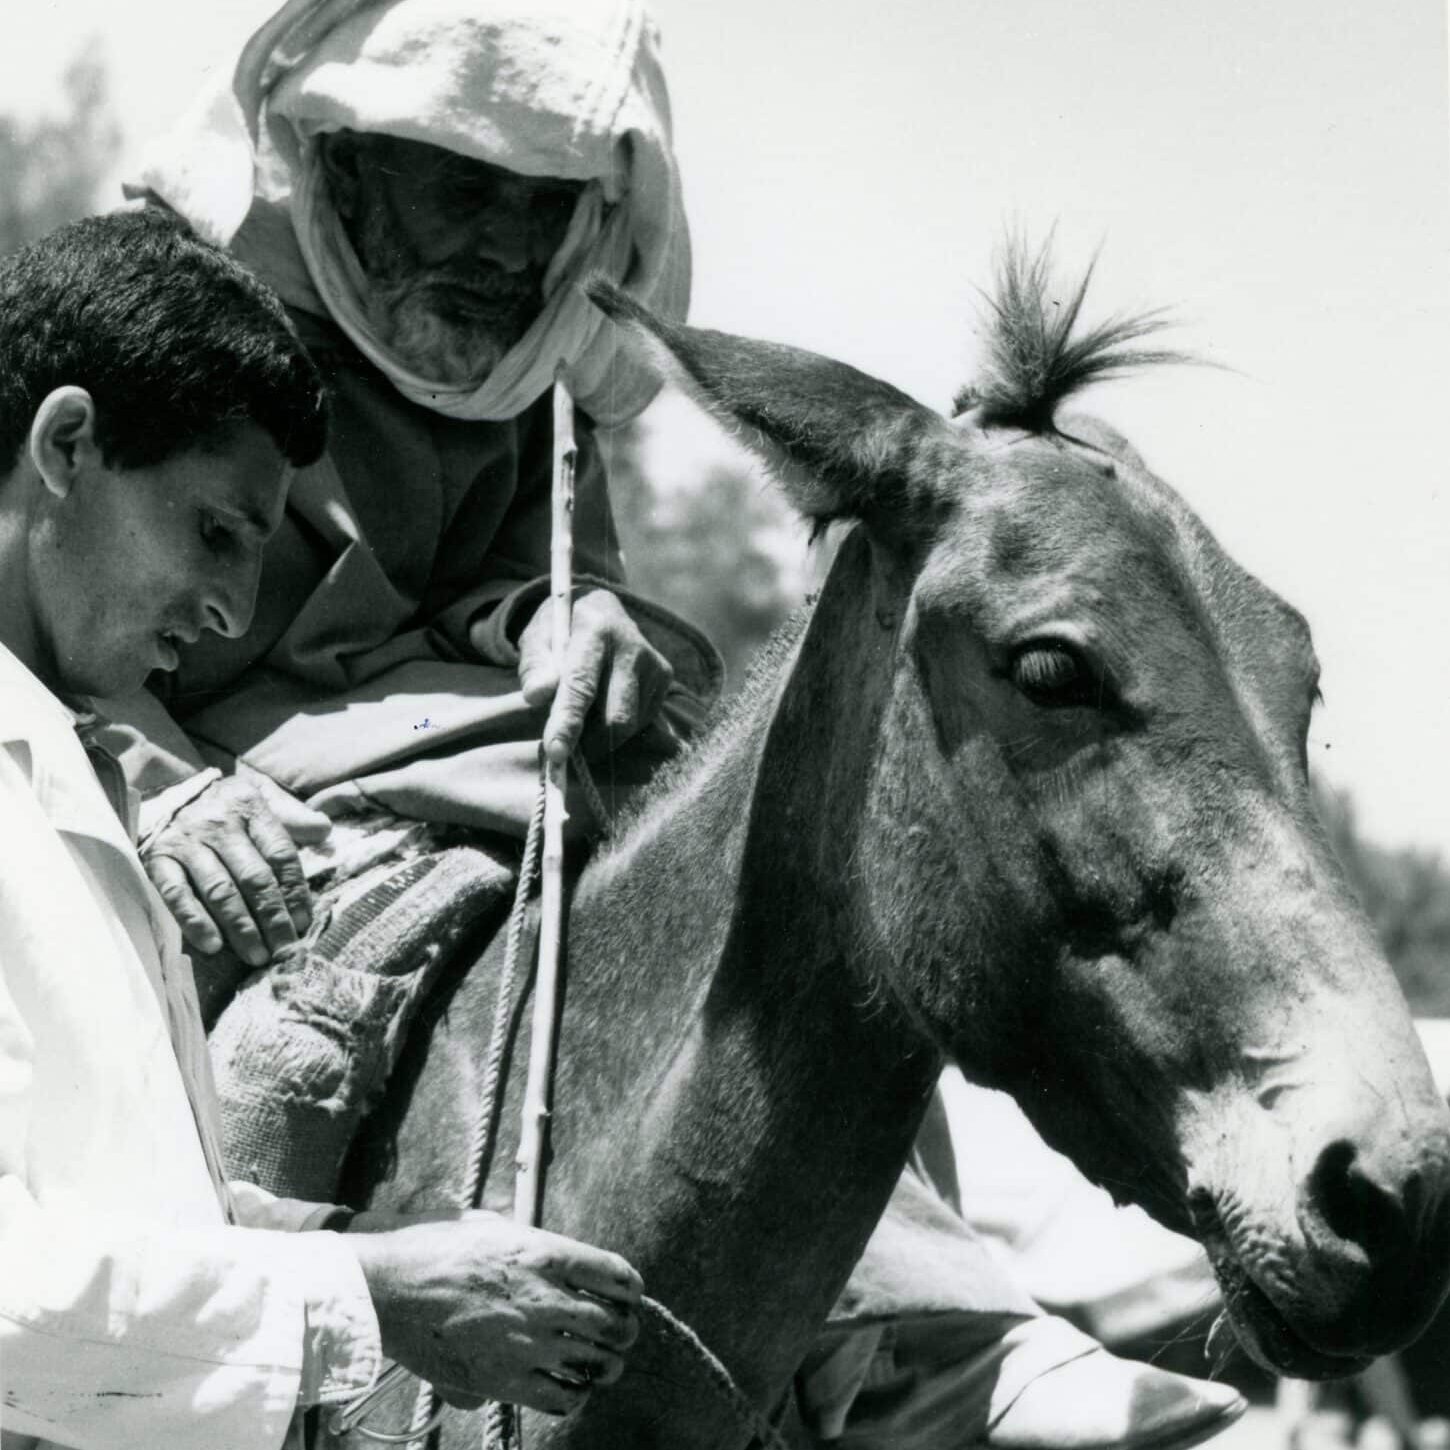 black and white photo of a mule. one man on the mule's back and the other man is standing to the side holding the reigns